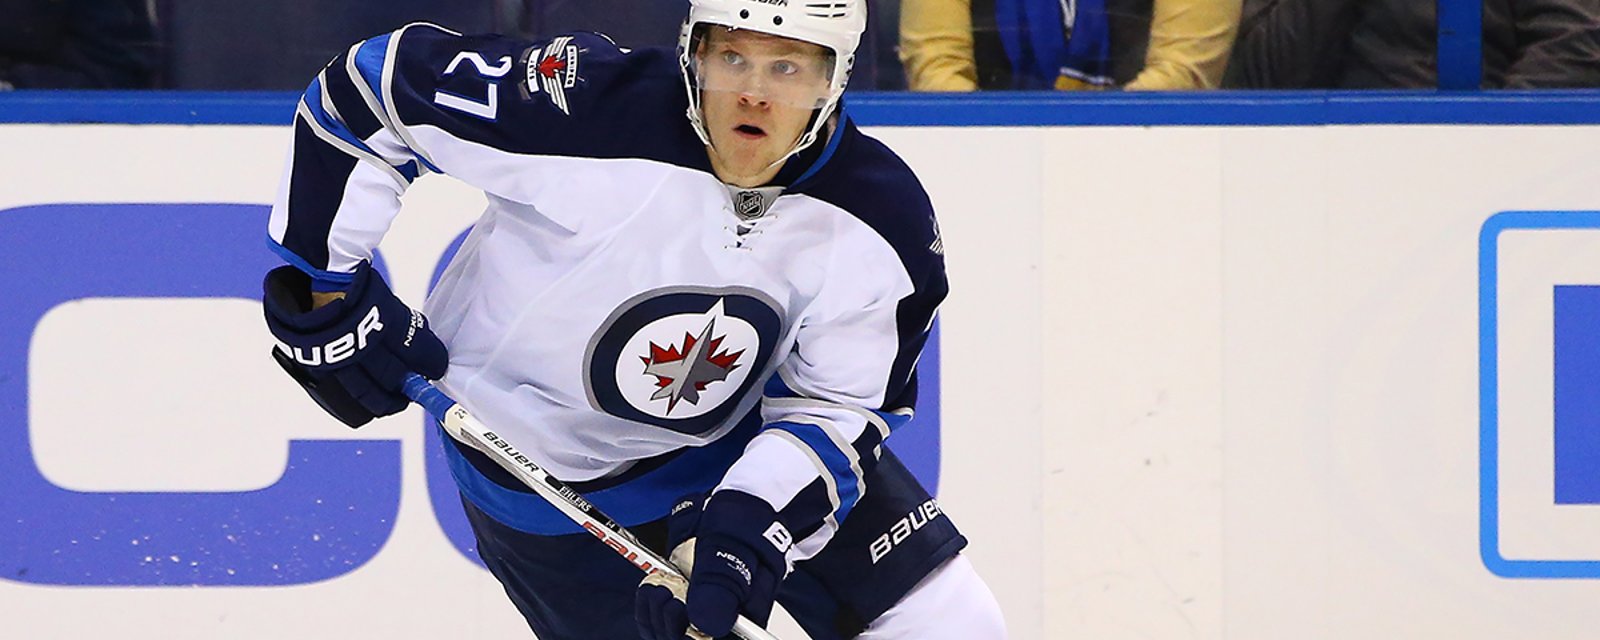 Breaking: Ehlers signs 7 year extension with Jets for HUGE money